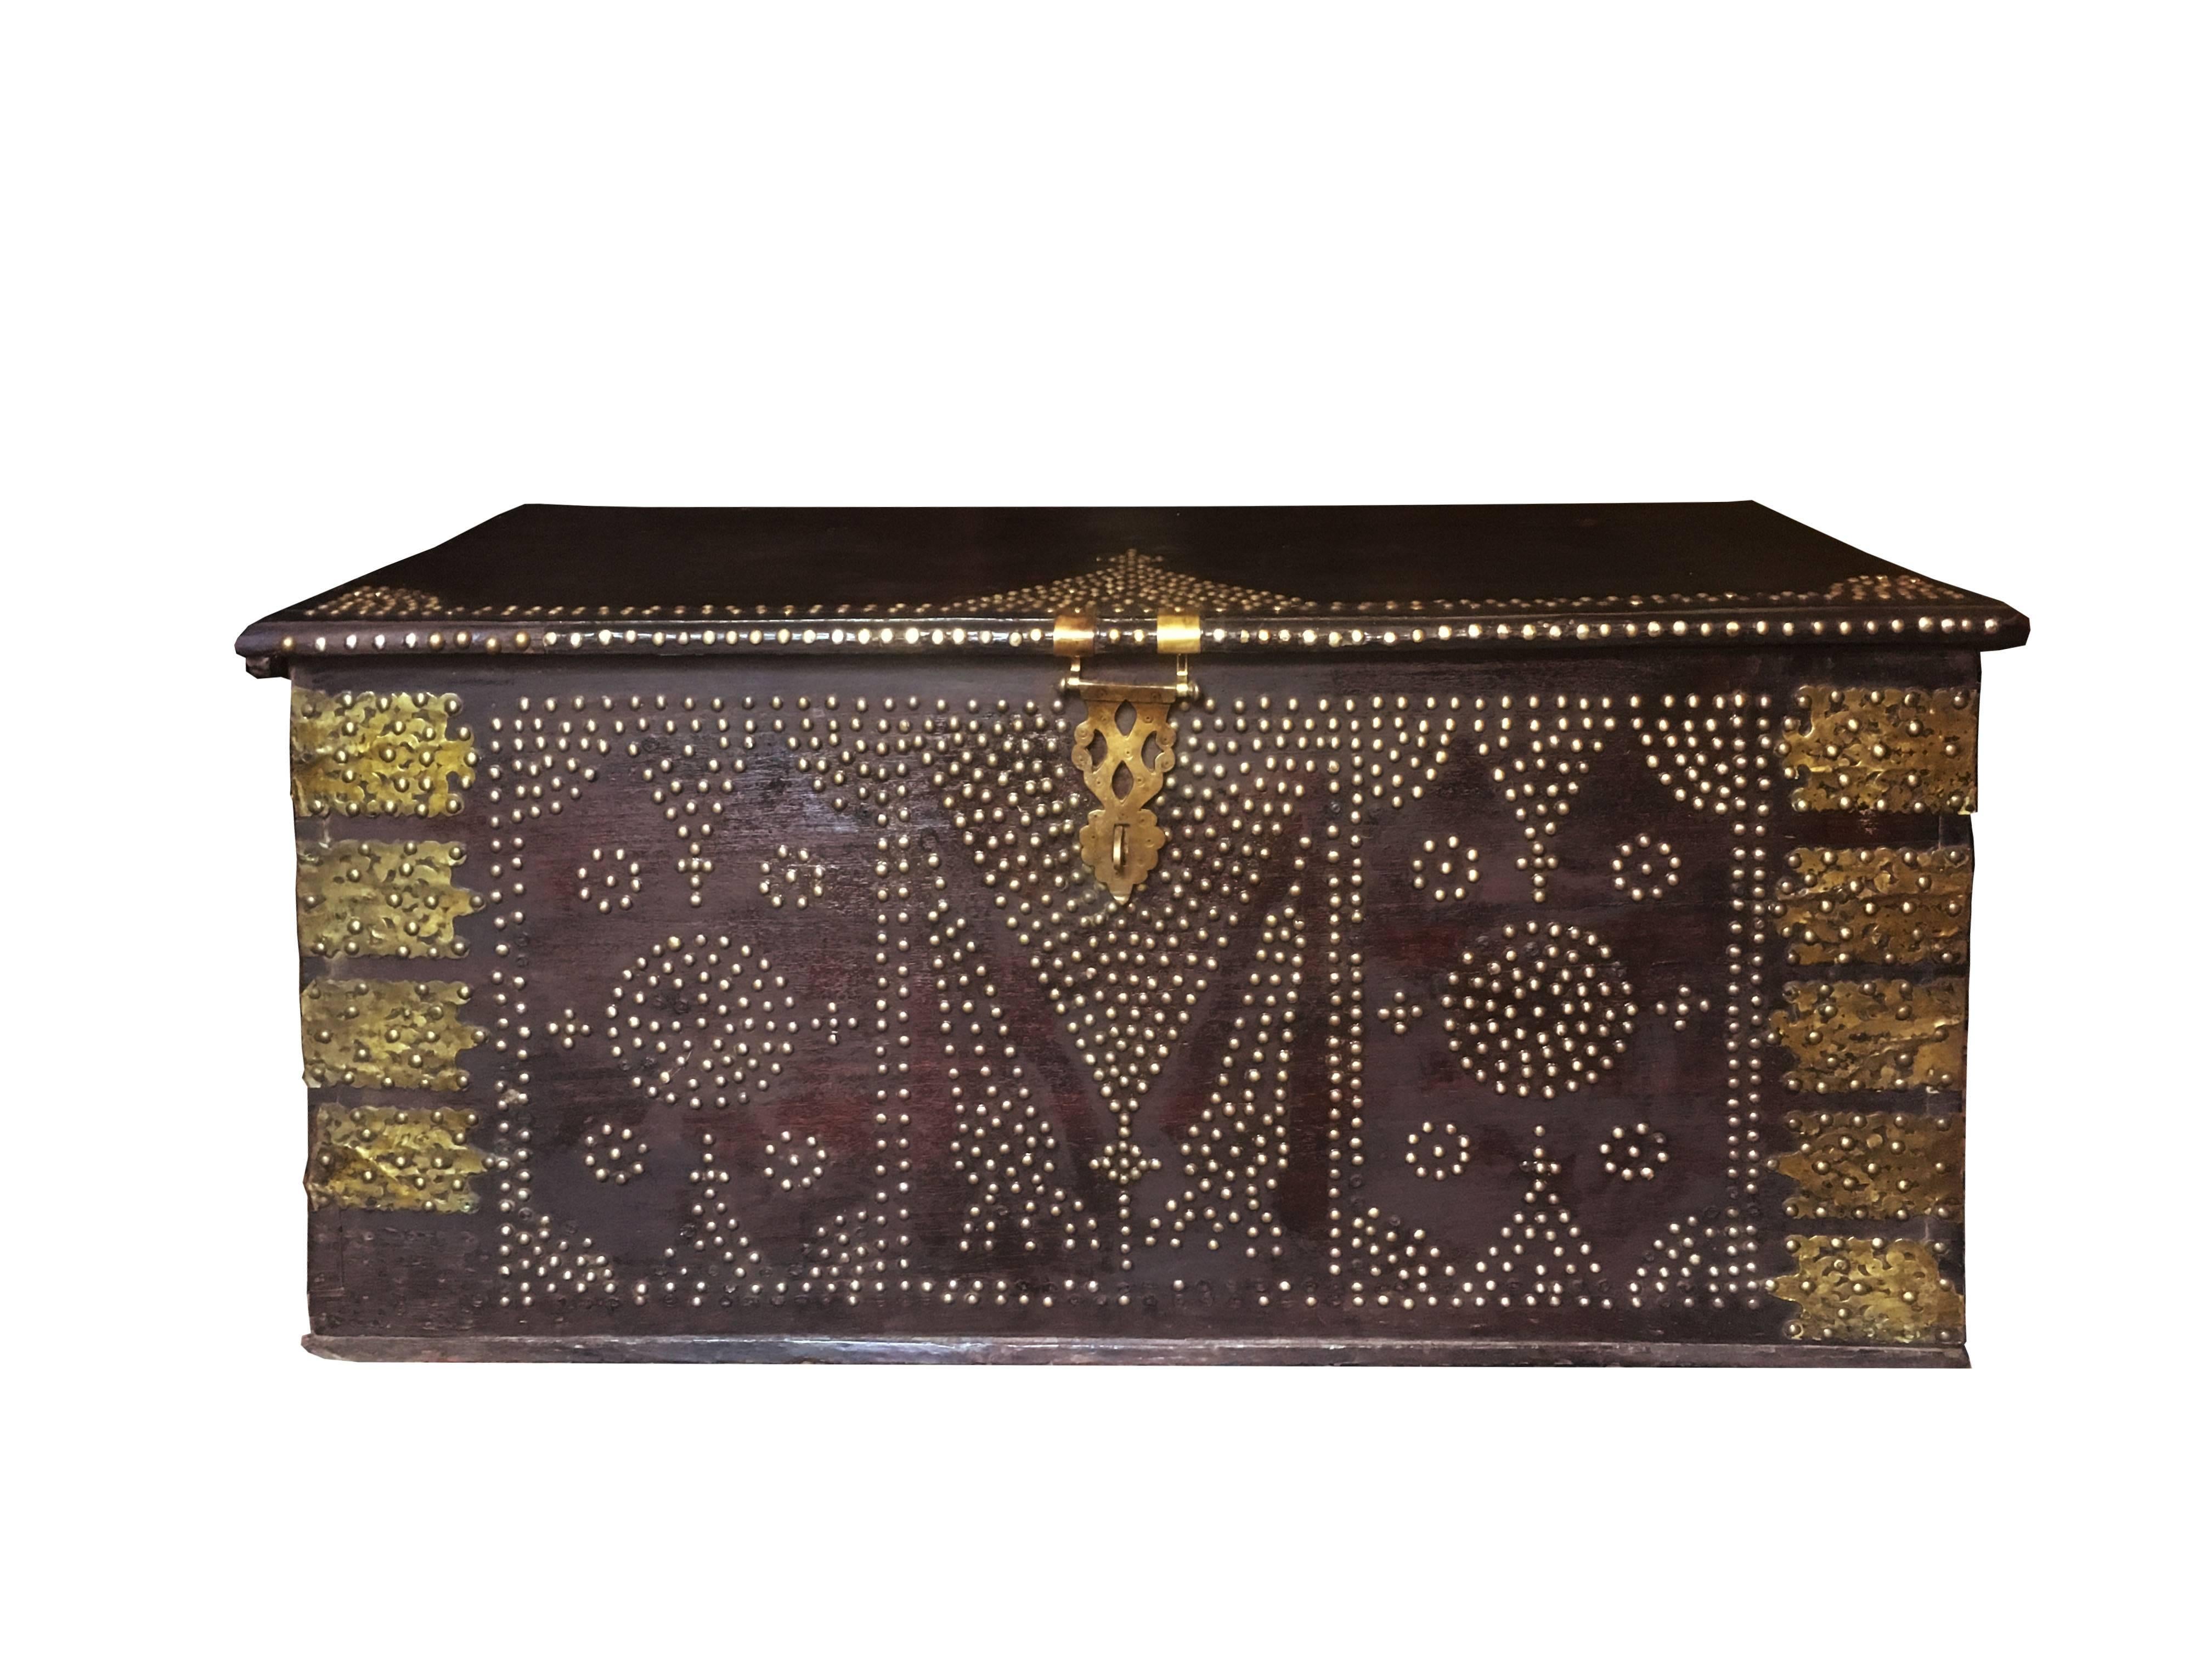 A stunning rare 19th century Zanzibar or Bombay chest composed of six thick slabs of teak wood. The exterior of the trunk is outfitted with brass sheets and studs in geometric patterns, particularly pyramidal shapes mounted by crosses, representing